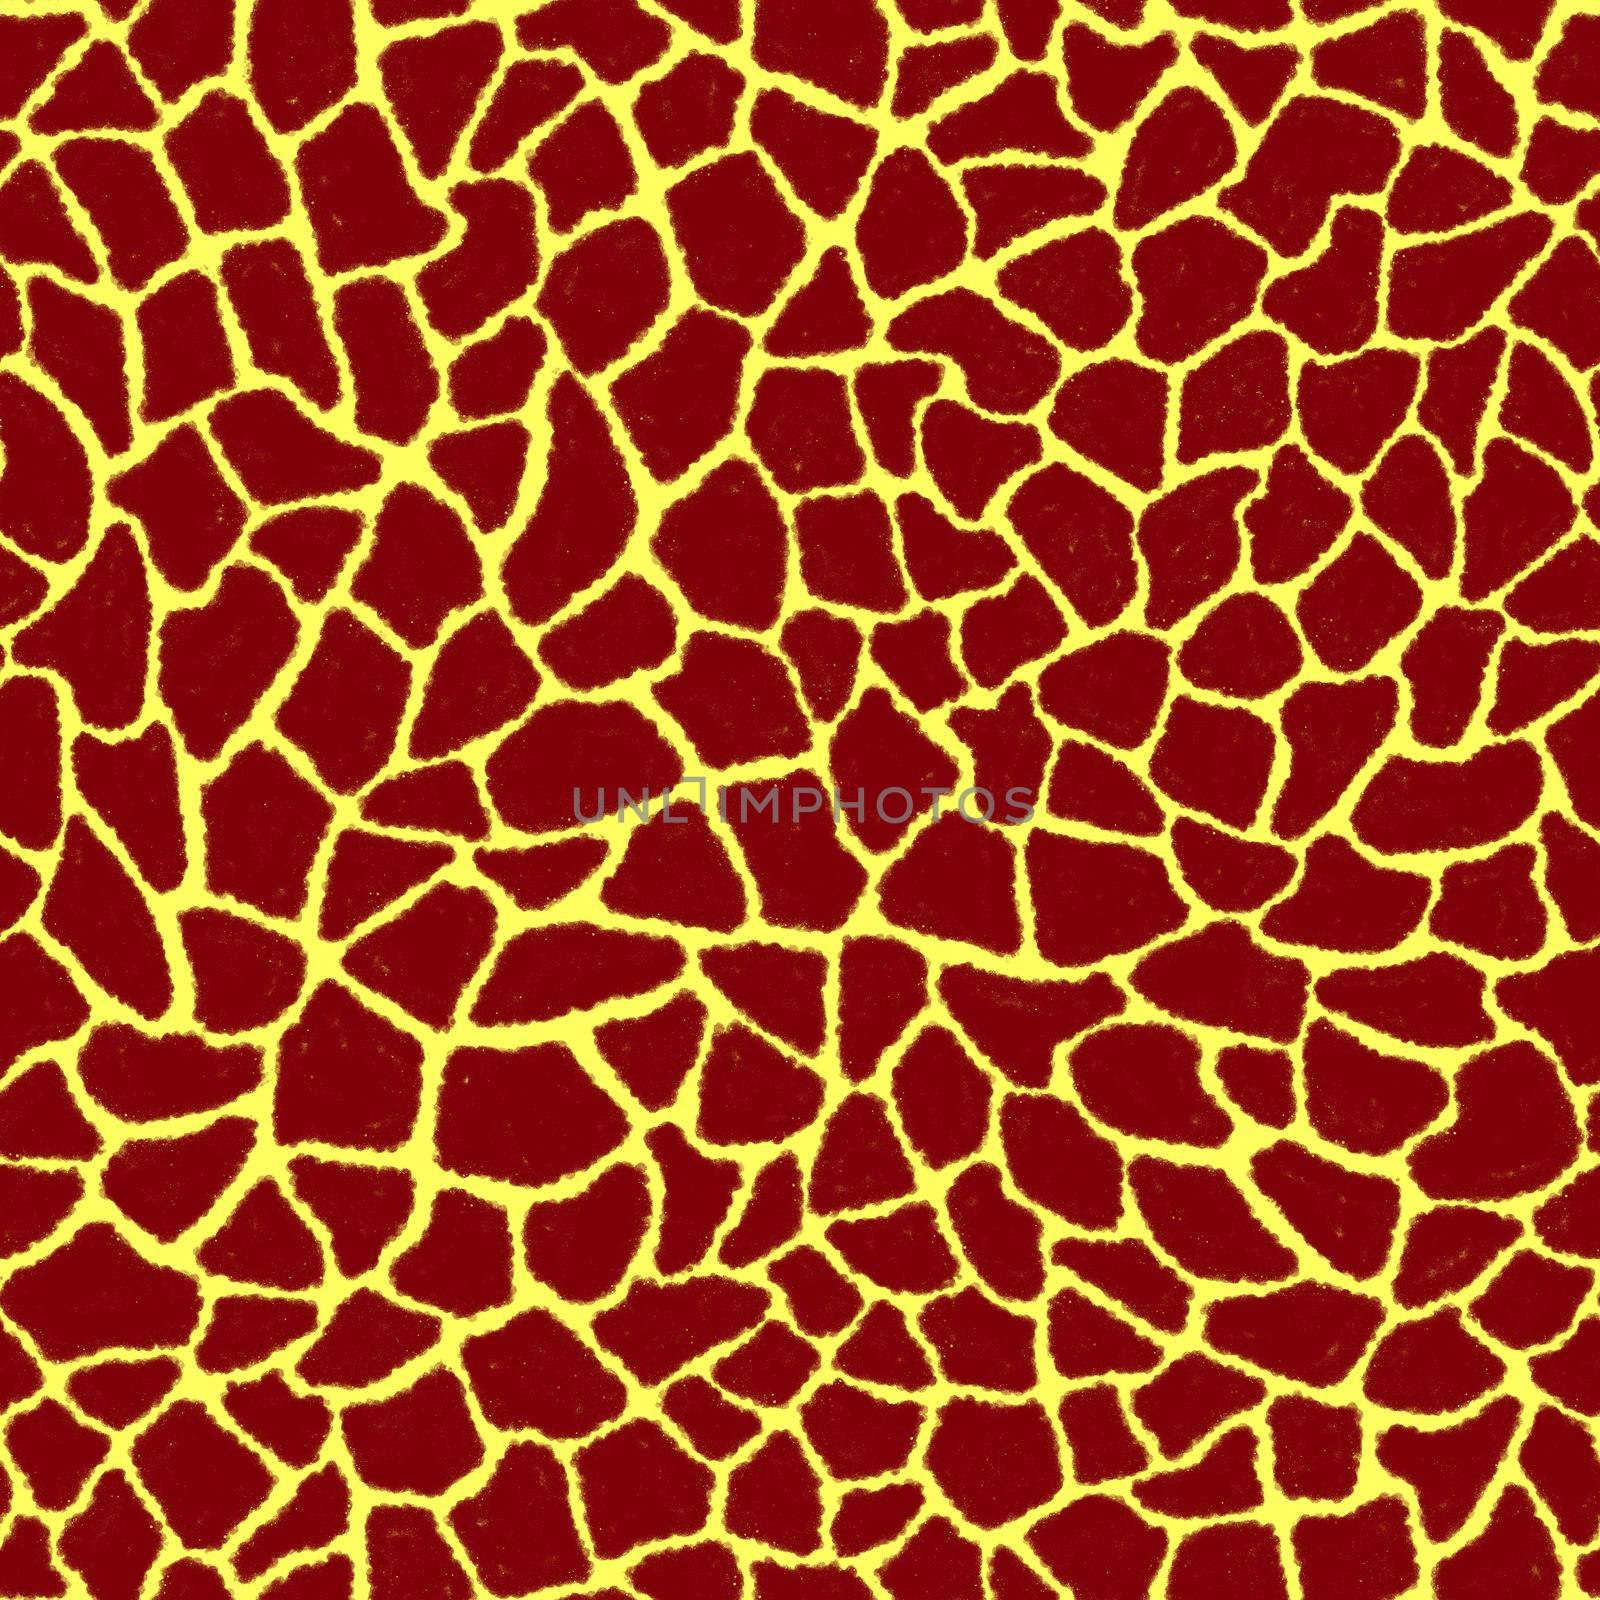 Giraffe skin color seamless pattern with fashion animal print for continuous replicate. Chaotic mosaic burgundy pieces on yellow background. Wrapping paper, funny textile fabric print,design,decor.